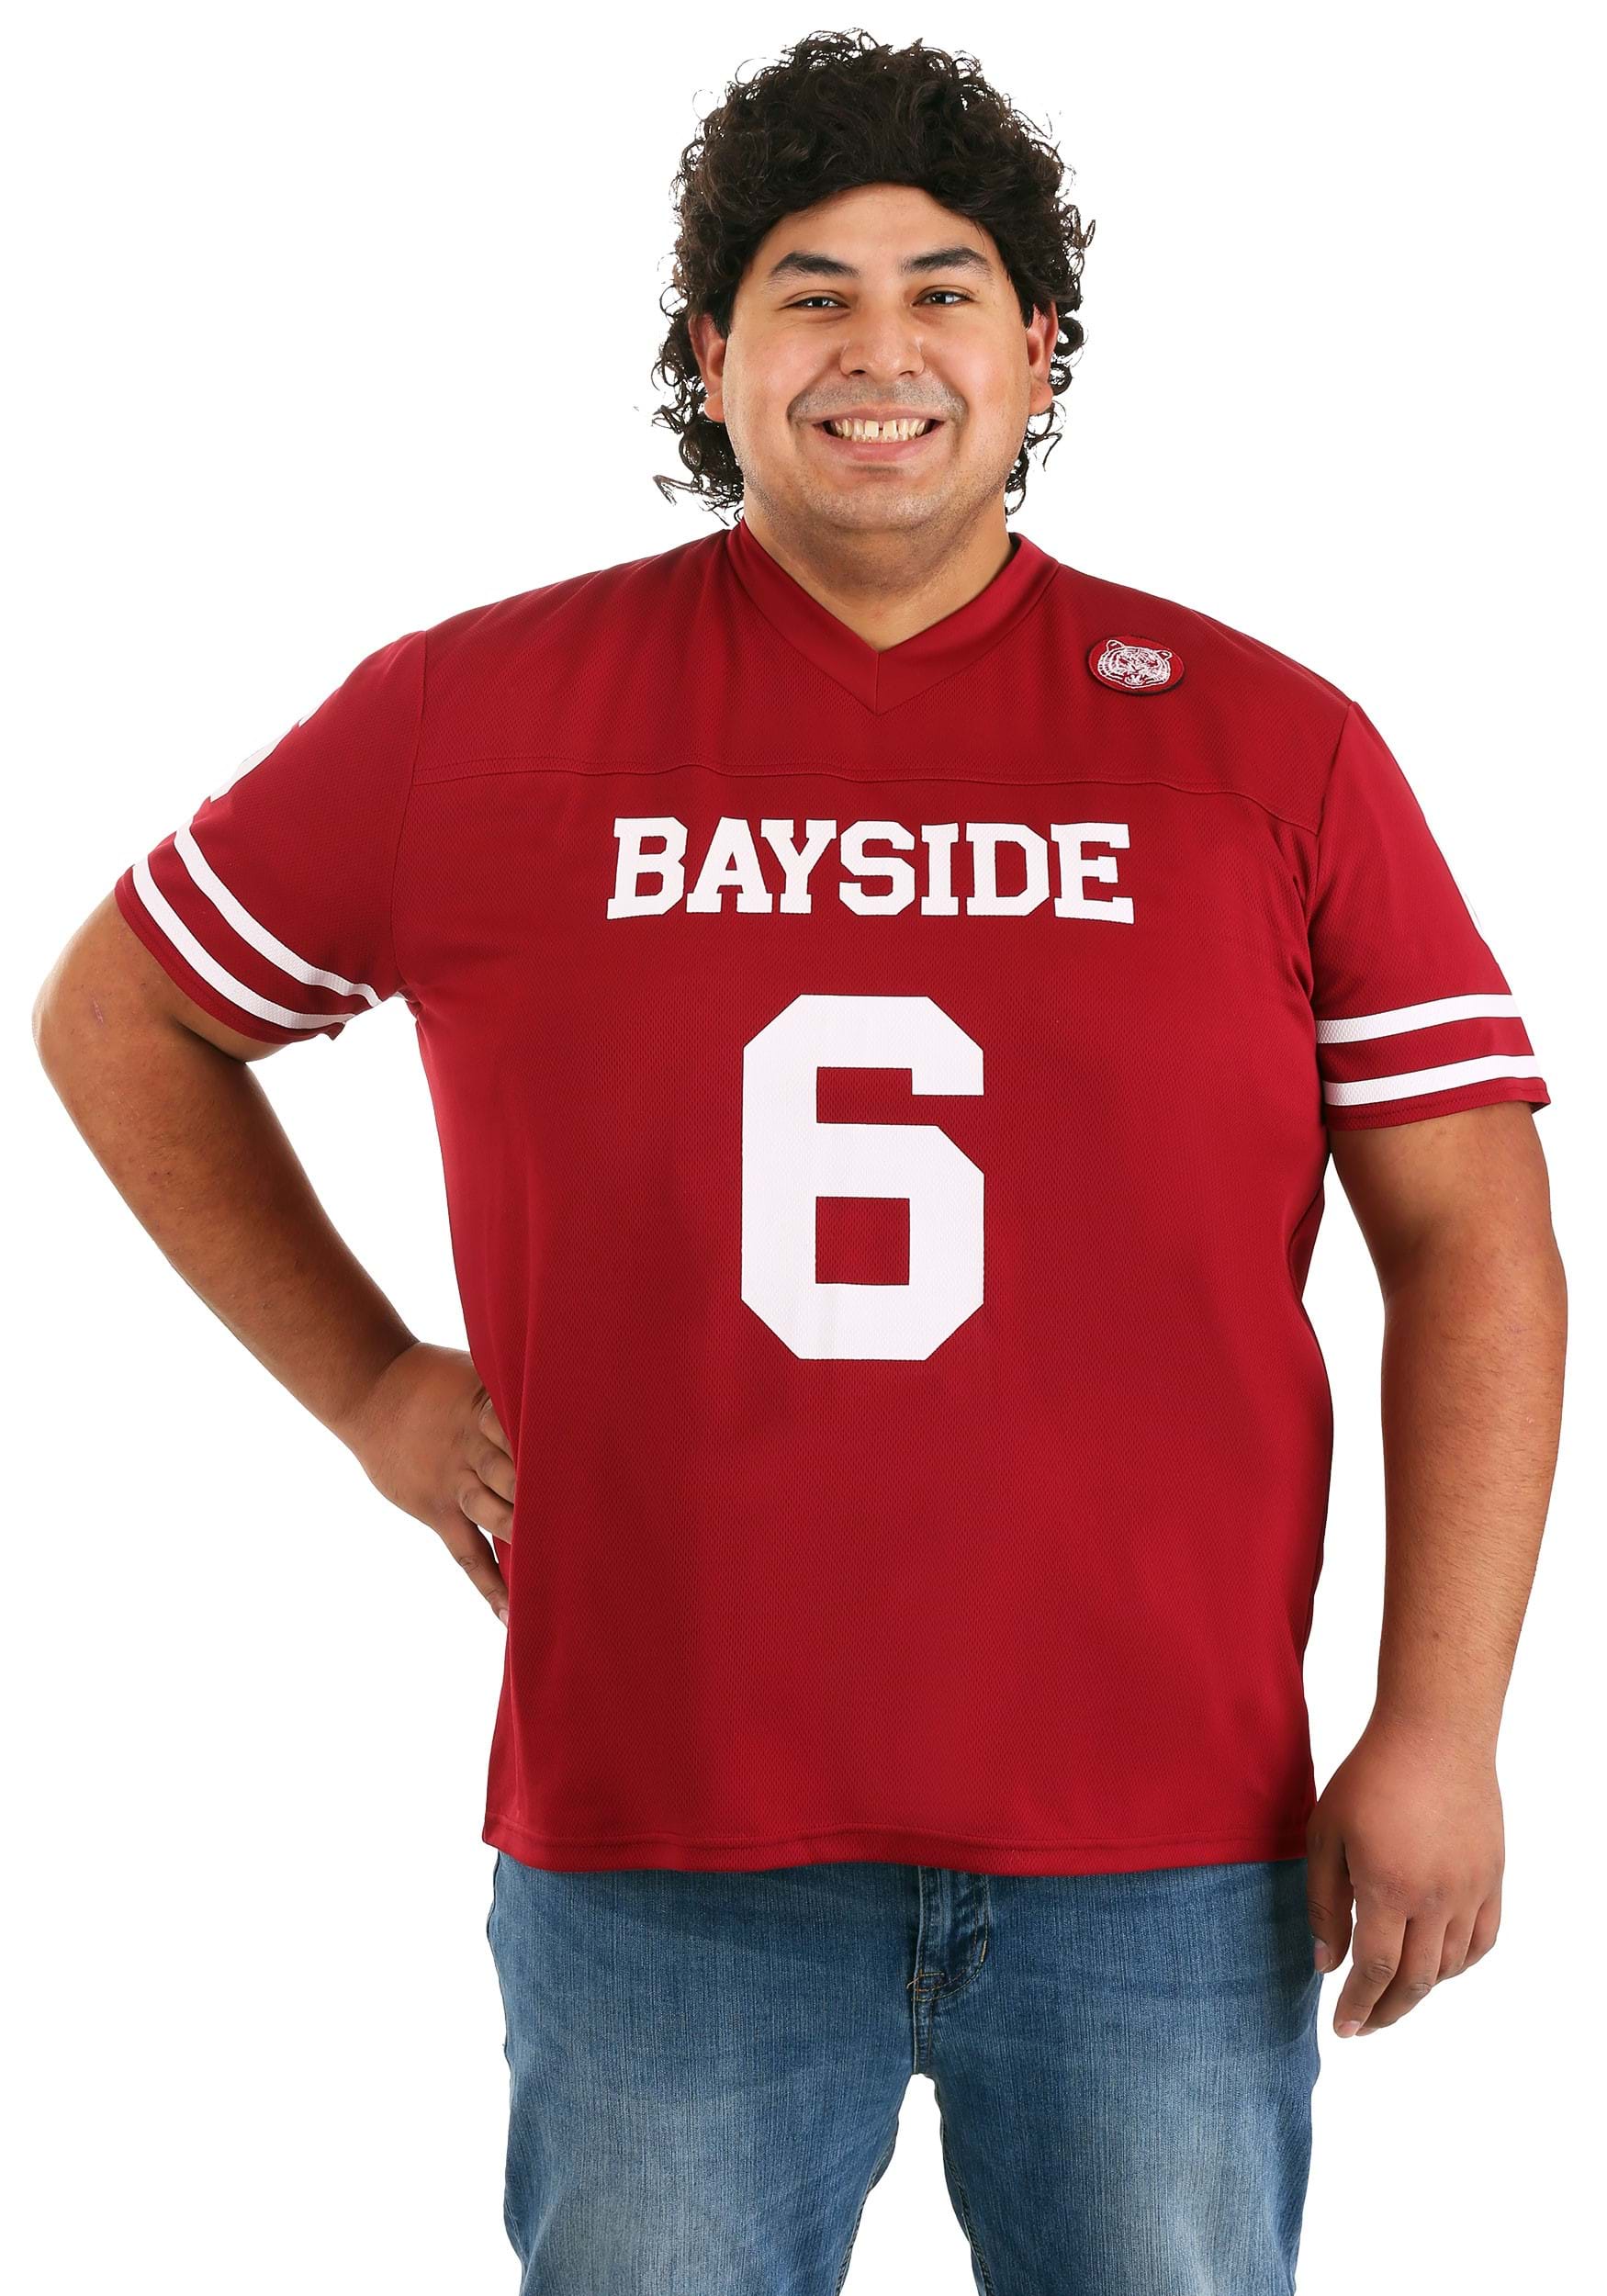 Saved By The Bell A.C. Slater Plus Size Men's Costume